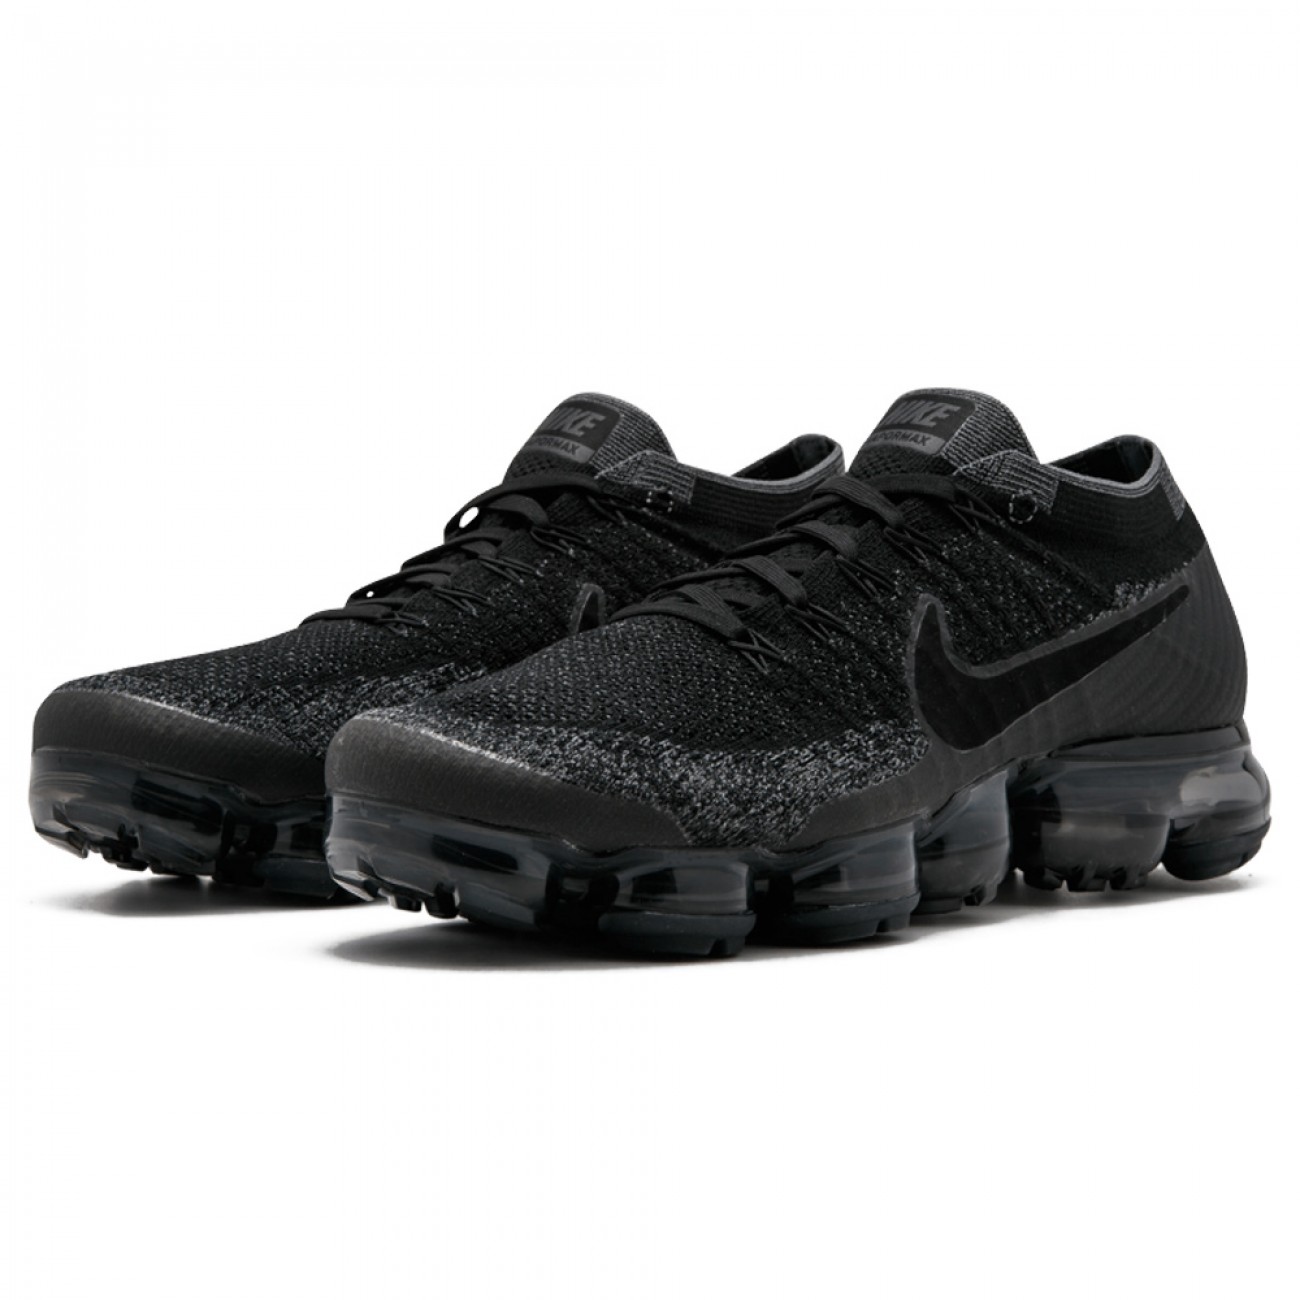 NIKE AIR VAPORMAX FLYKNIT BLACK/ANTHRACITE